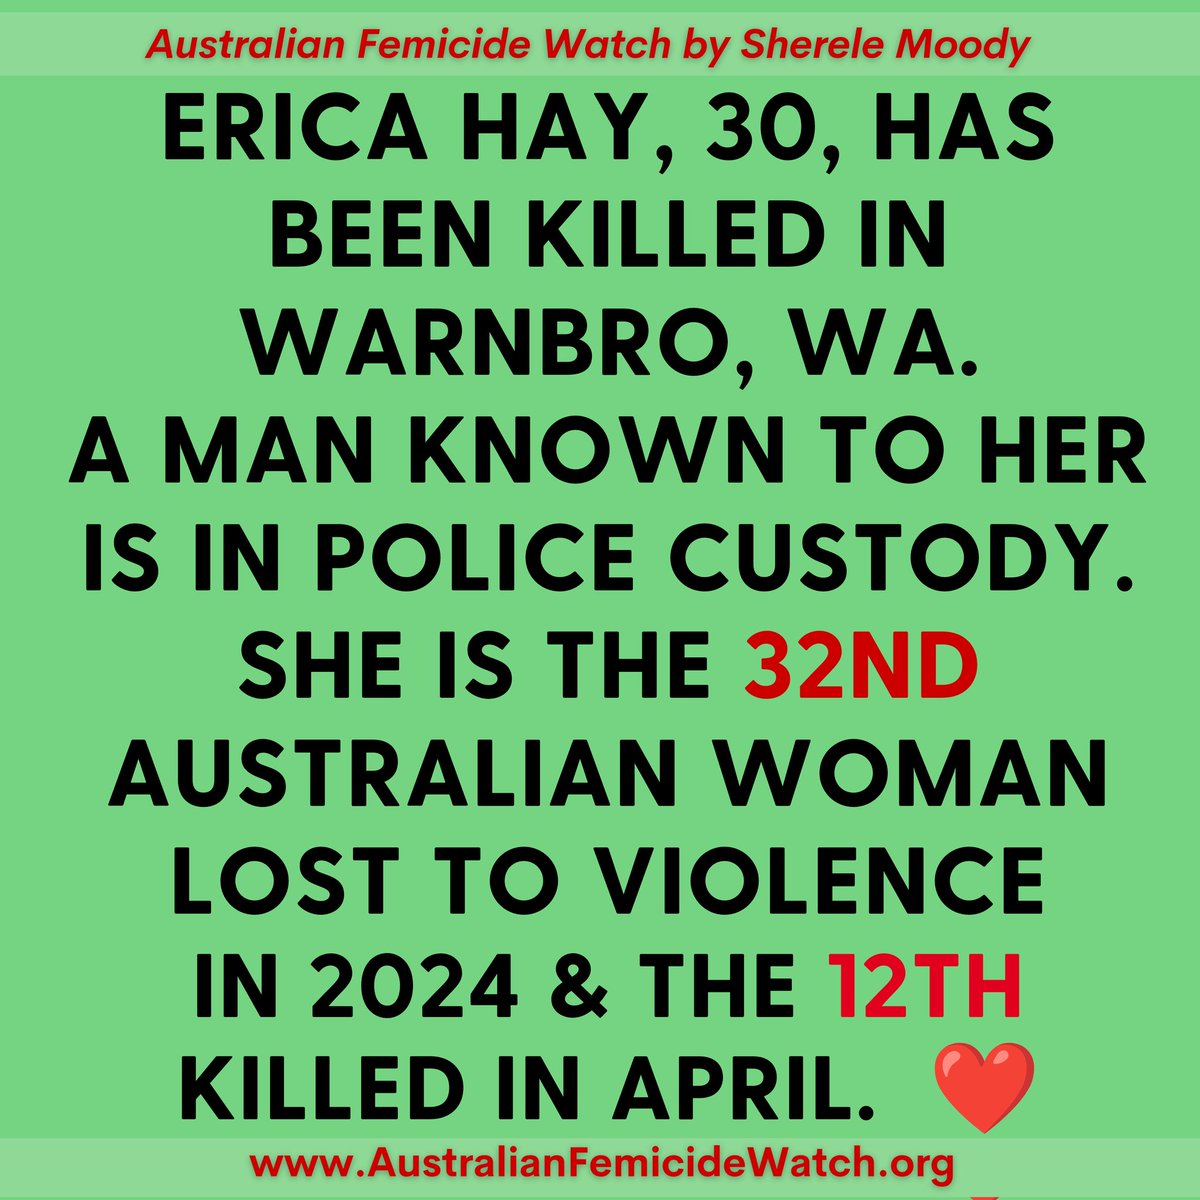 The killing of women is relentless. Australia .... We need action. Another woman has been murdered in Australia. Mum Erica Hay died in a house fire overnight in Warnbro, WA. A man known to her is in custody. Police have confirmed her death as a homicide. She is the 32nd woman…